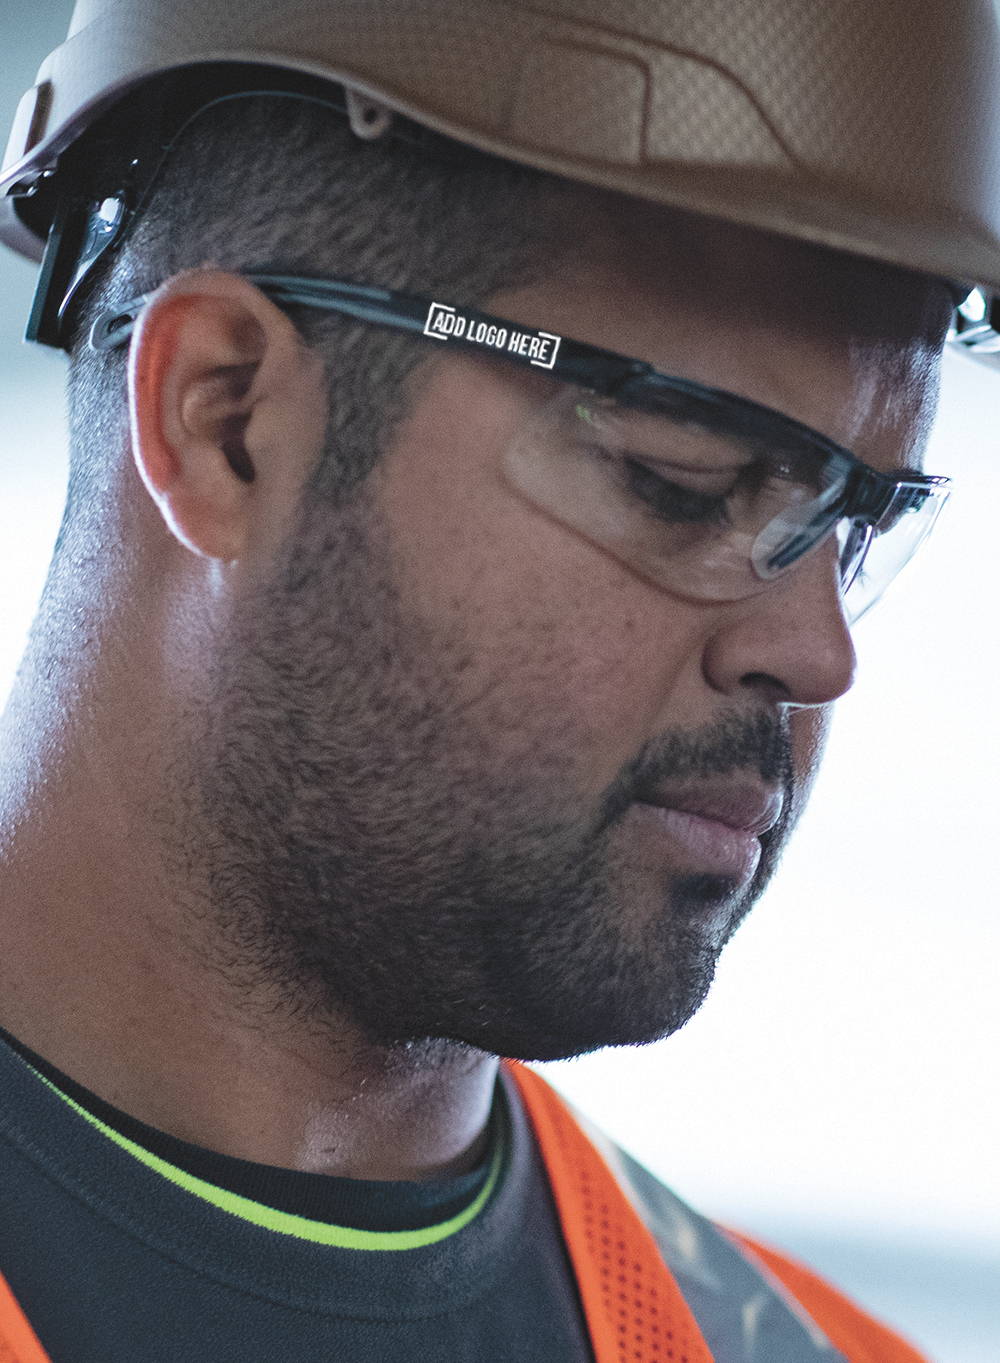 Construction worker wearing hard hat, hi-vis vest and safety glasses with company logo custom printed on the temple of the safety glasses.